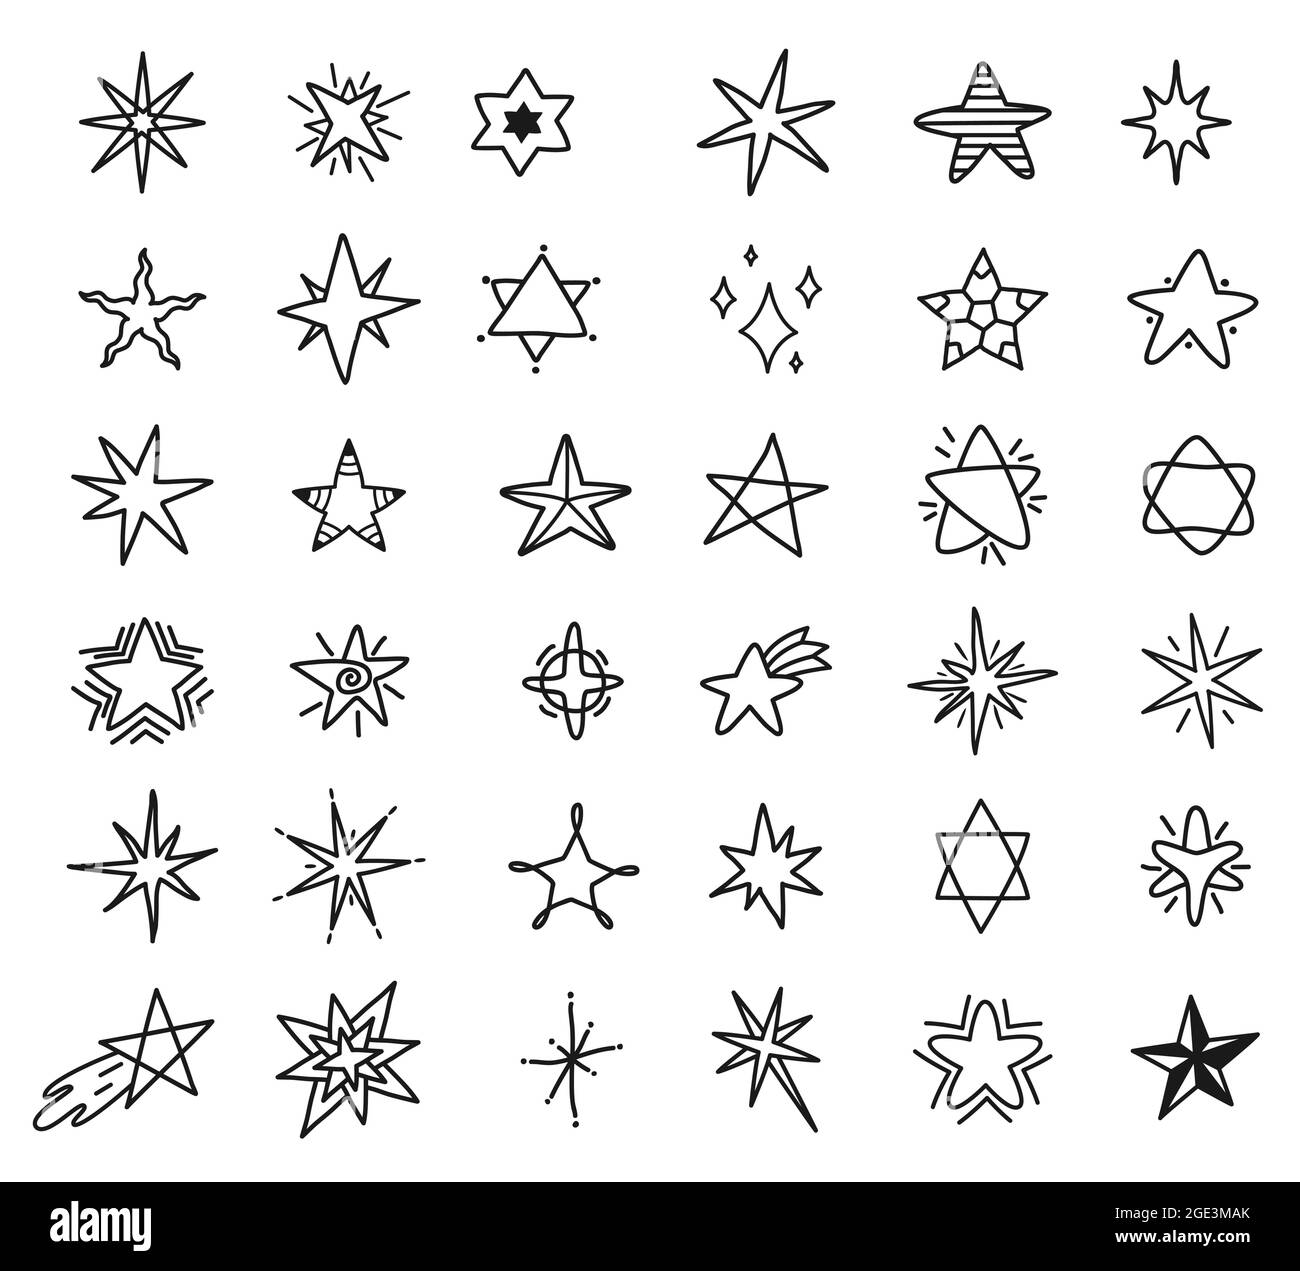 Shooting star pattern Black and White Stock Photos & Images - Alamy